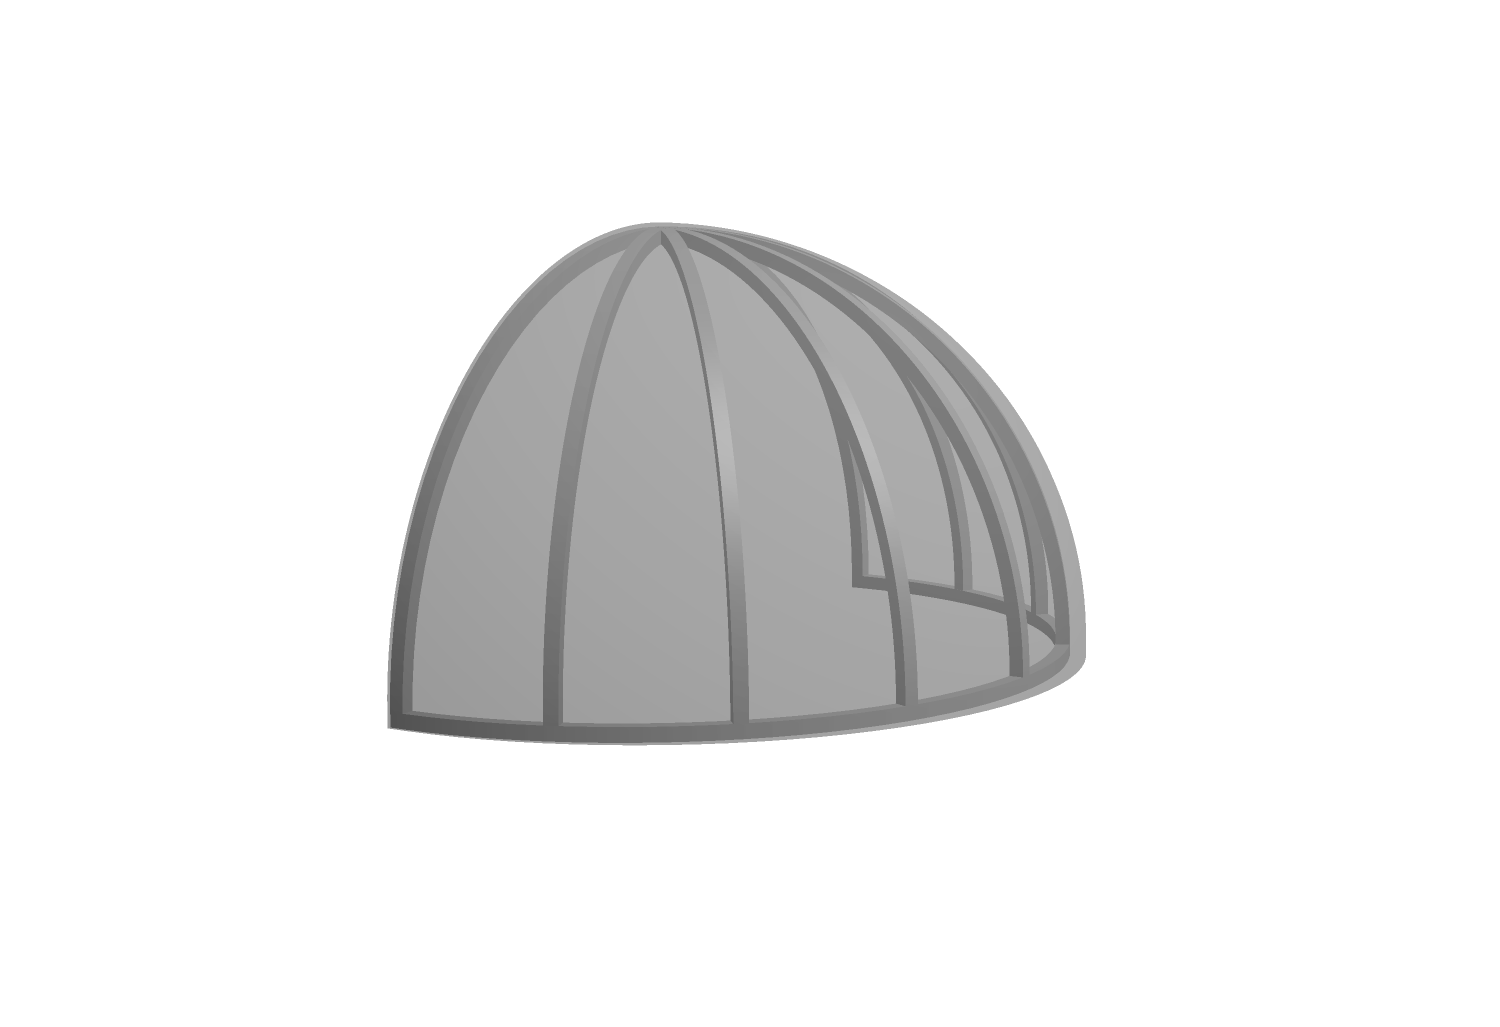 3D model of a dome awning